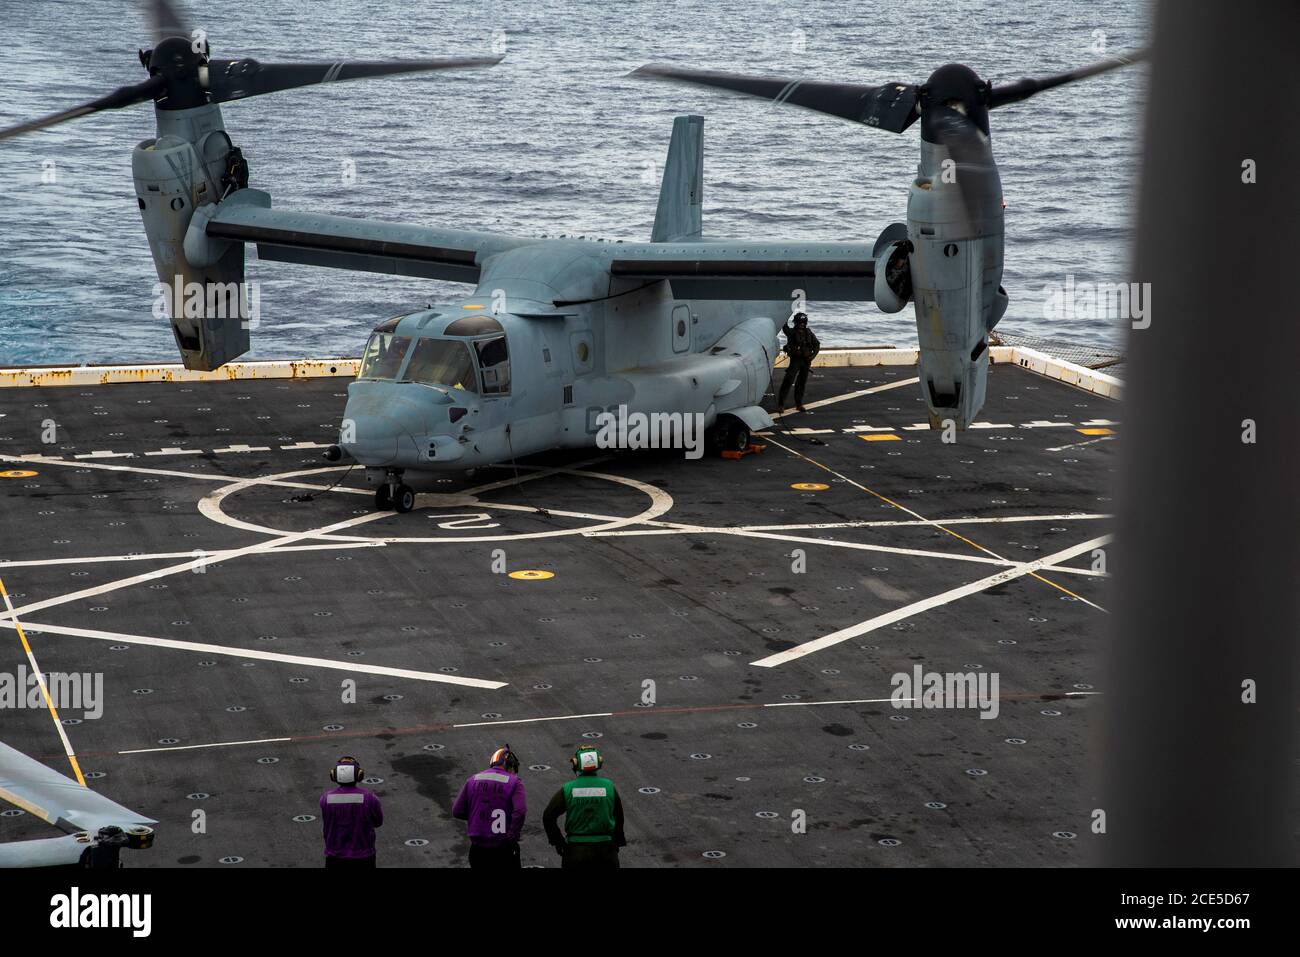 PHILIPPINE SEA (Aug. 22, 2020) Equipment is offloaded from an MV-22B Osprey tiltrotor aircraft with Marine Medium Tiltrotor Squadron 262 (Reinforced), 31st Marine Expeditionary Unit (MEU) aboard USS New Orleans (LPD 18). New Orleans, part of the America Amphibious Ready Group (ARG), 31st MEU team, is operating in the U.S. 7th Fleet area of operation to enhance interoperability with allies and partners and serve as a ready response force to defend peace and stability in the Indo-Pacific region. The America ARG, 31st MEU team remains the premier crisis response force in the region despite the un Stock Photo